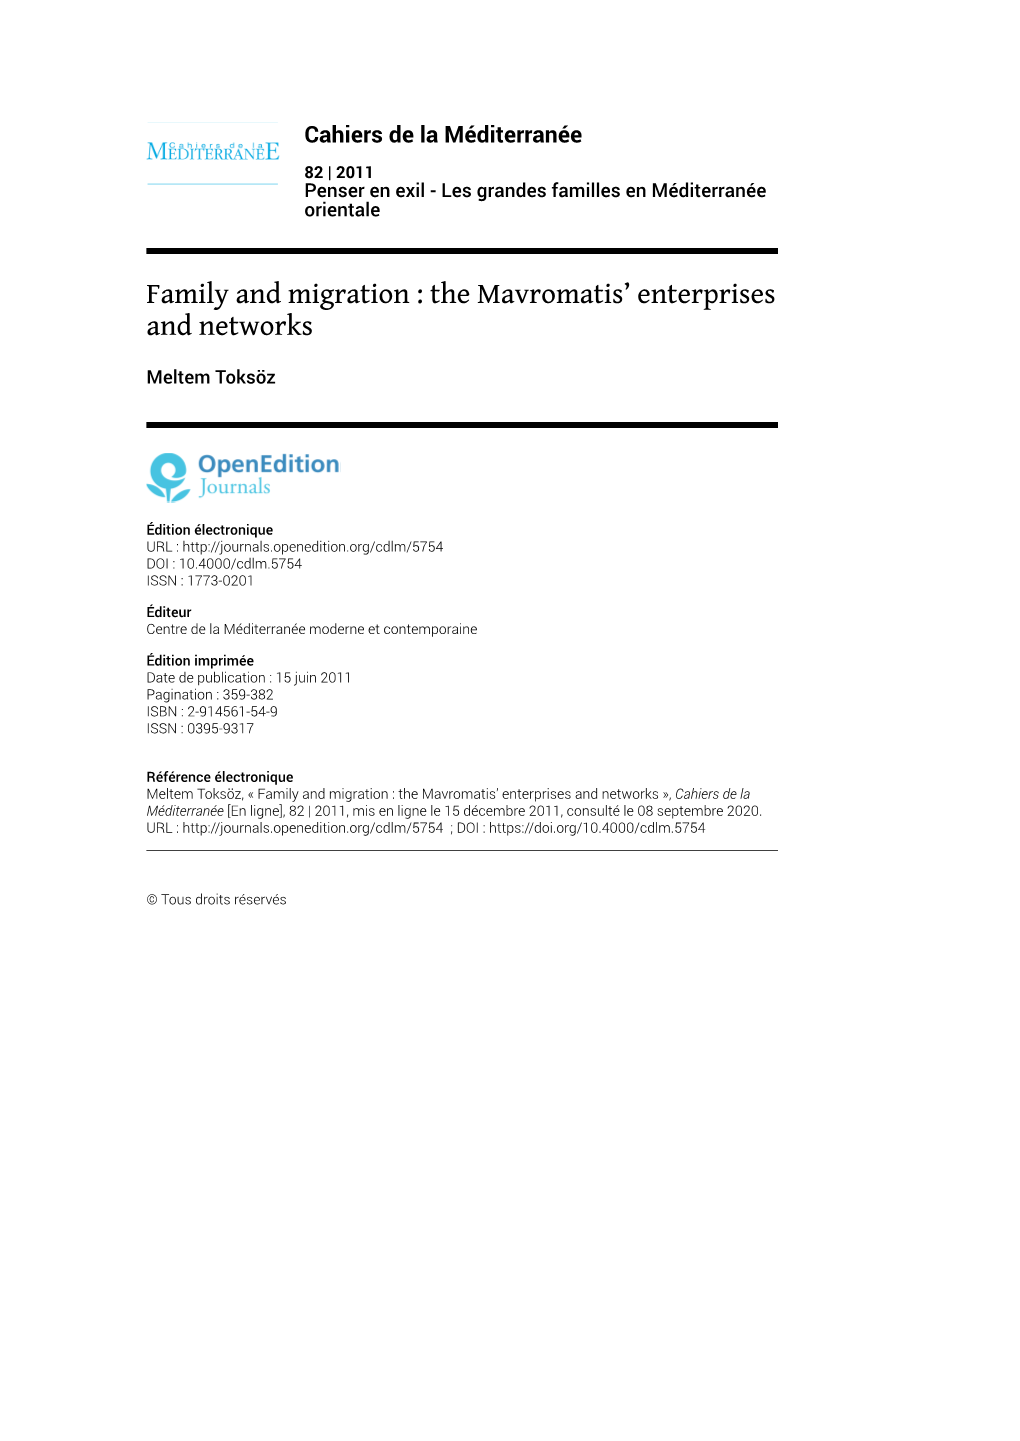 Family and Migration : the Mavromatis' Enterprises and Networks